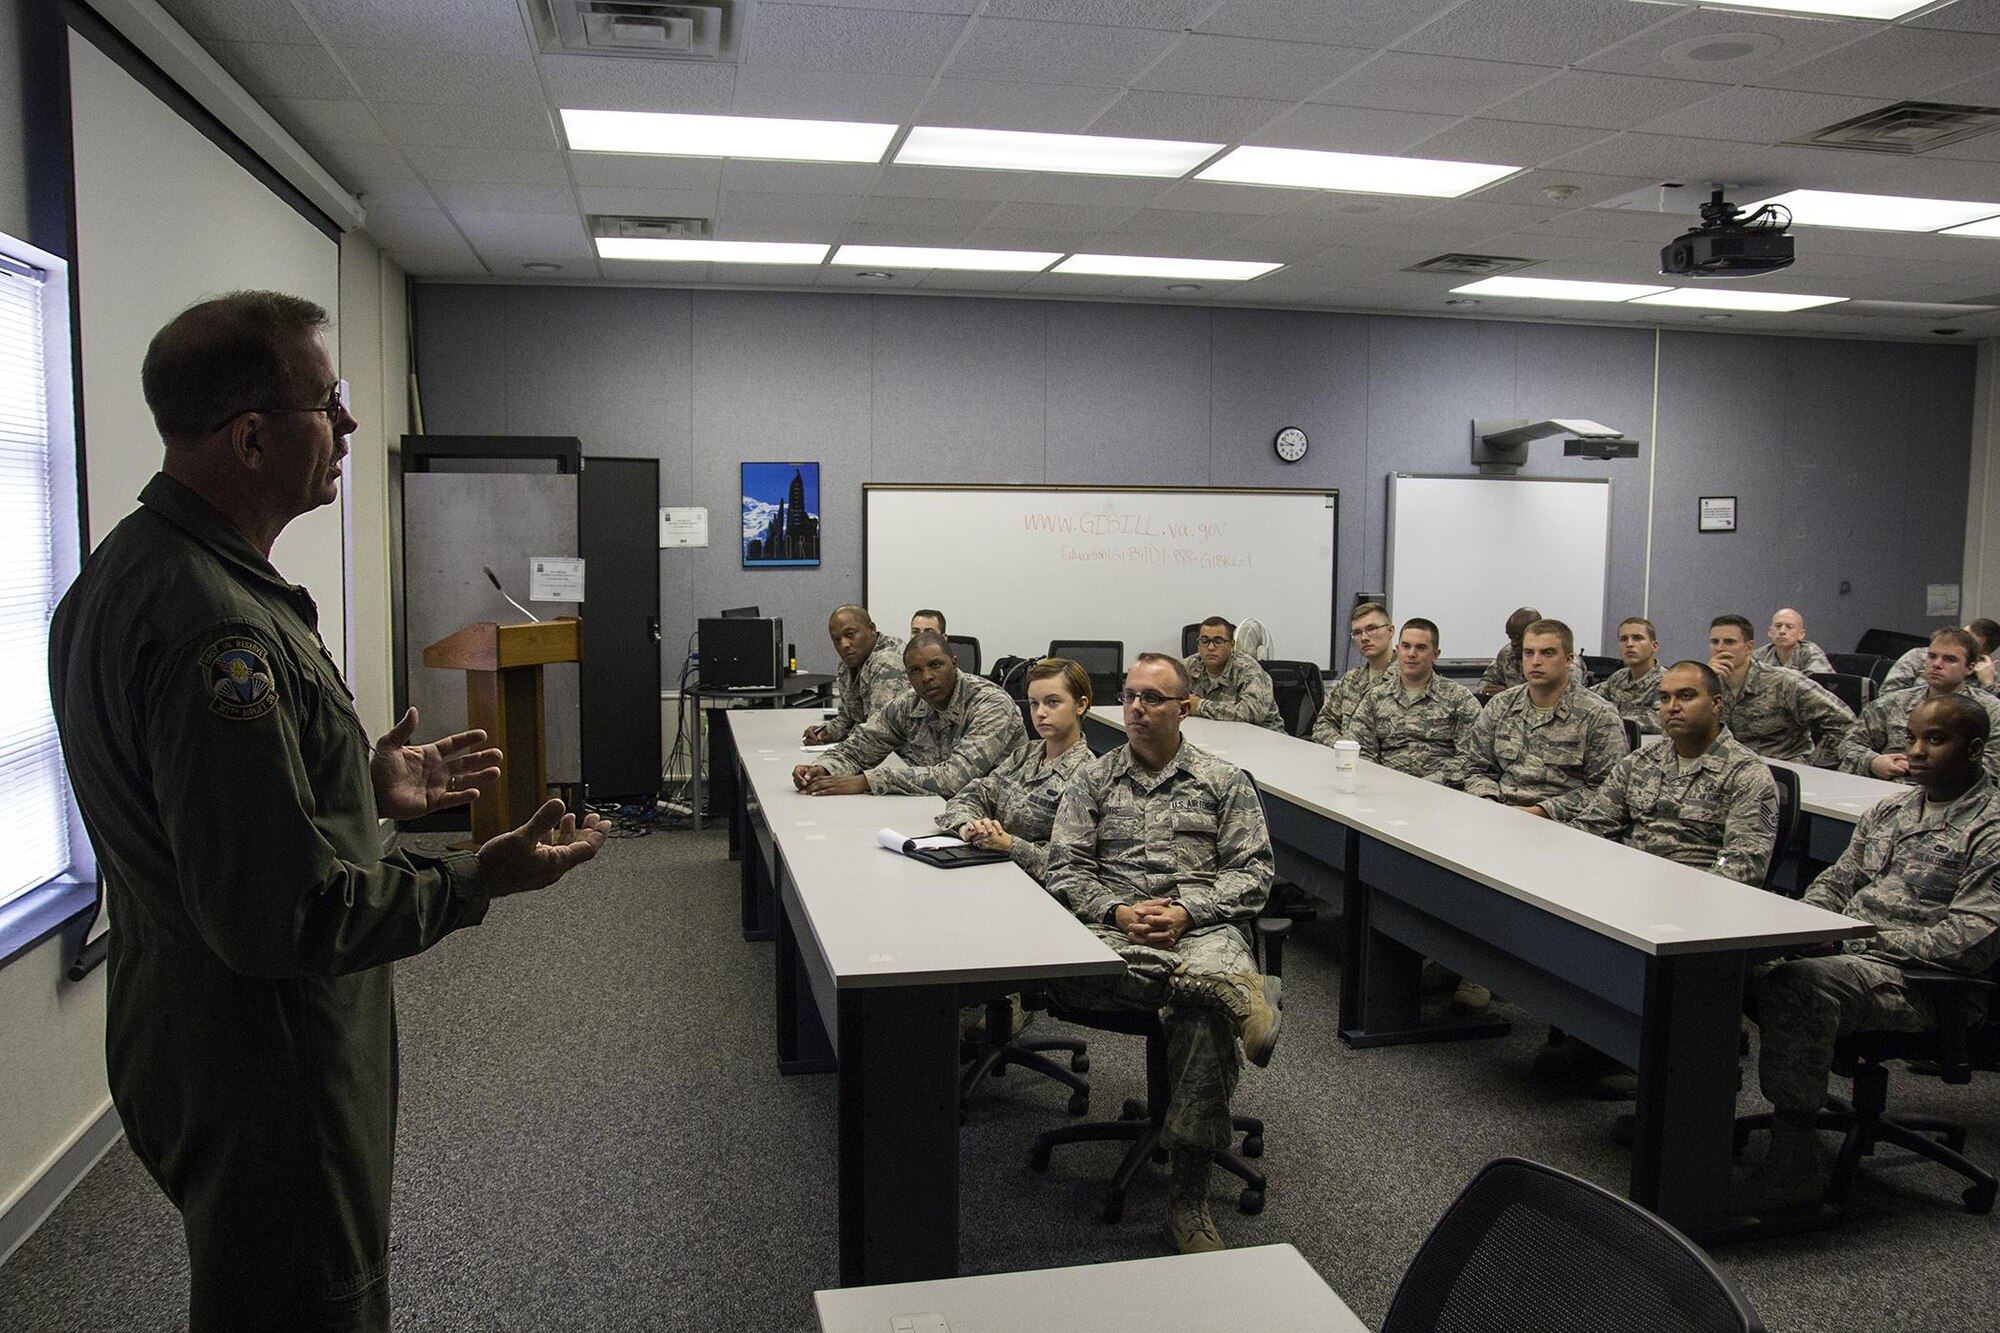 Chief Master Sgt. Bryan DuBois, 317th Airlift Squadron loadmaster superintendent, shares his Air Force Reserve story with a group of Air Force chaplain candidates who visited Joint Base Charleston this week. The 315th Airlift Wing Chaplain Service hosted the 18 second lieutenants in an effort to tell the young officers about the opportunities available to them as Air Force Reserve chaplains. Besides meeting Reserve and active duty Airmen around the base, the group also visited patients at the Charleston VA Medical Center. Over the weekend they were scheduled to participate in the Joint Base Charleston Chapel services with active duty chaplains on the main base and over at the Naval Weapons Station. Weather permitting, they also hope to get a chance to visit the “Holy Cities” many historical churches before departing the area. (U.S. Photo by Michael Dukes)